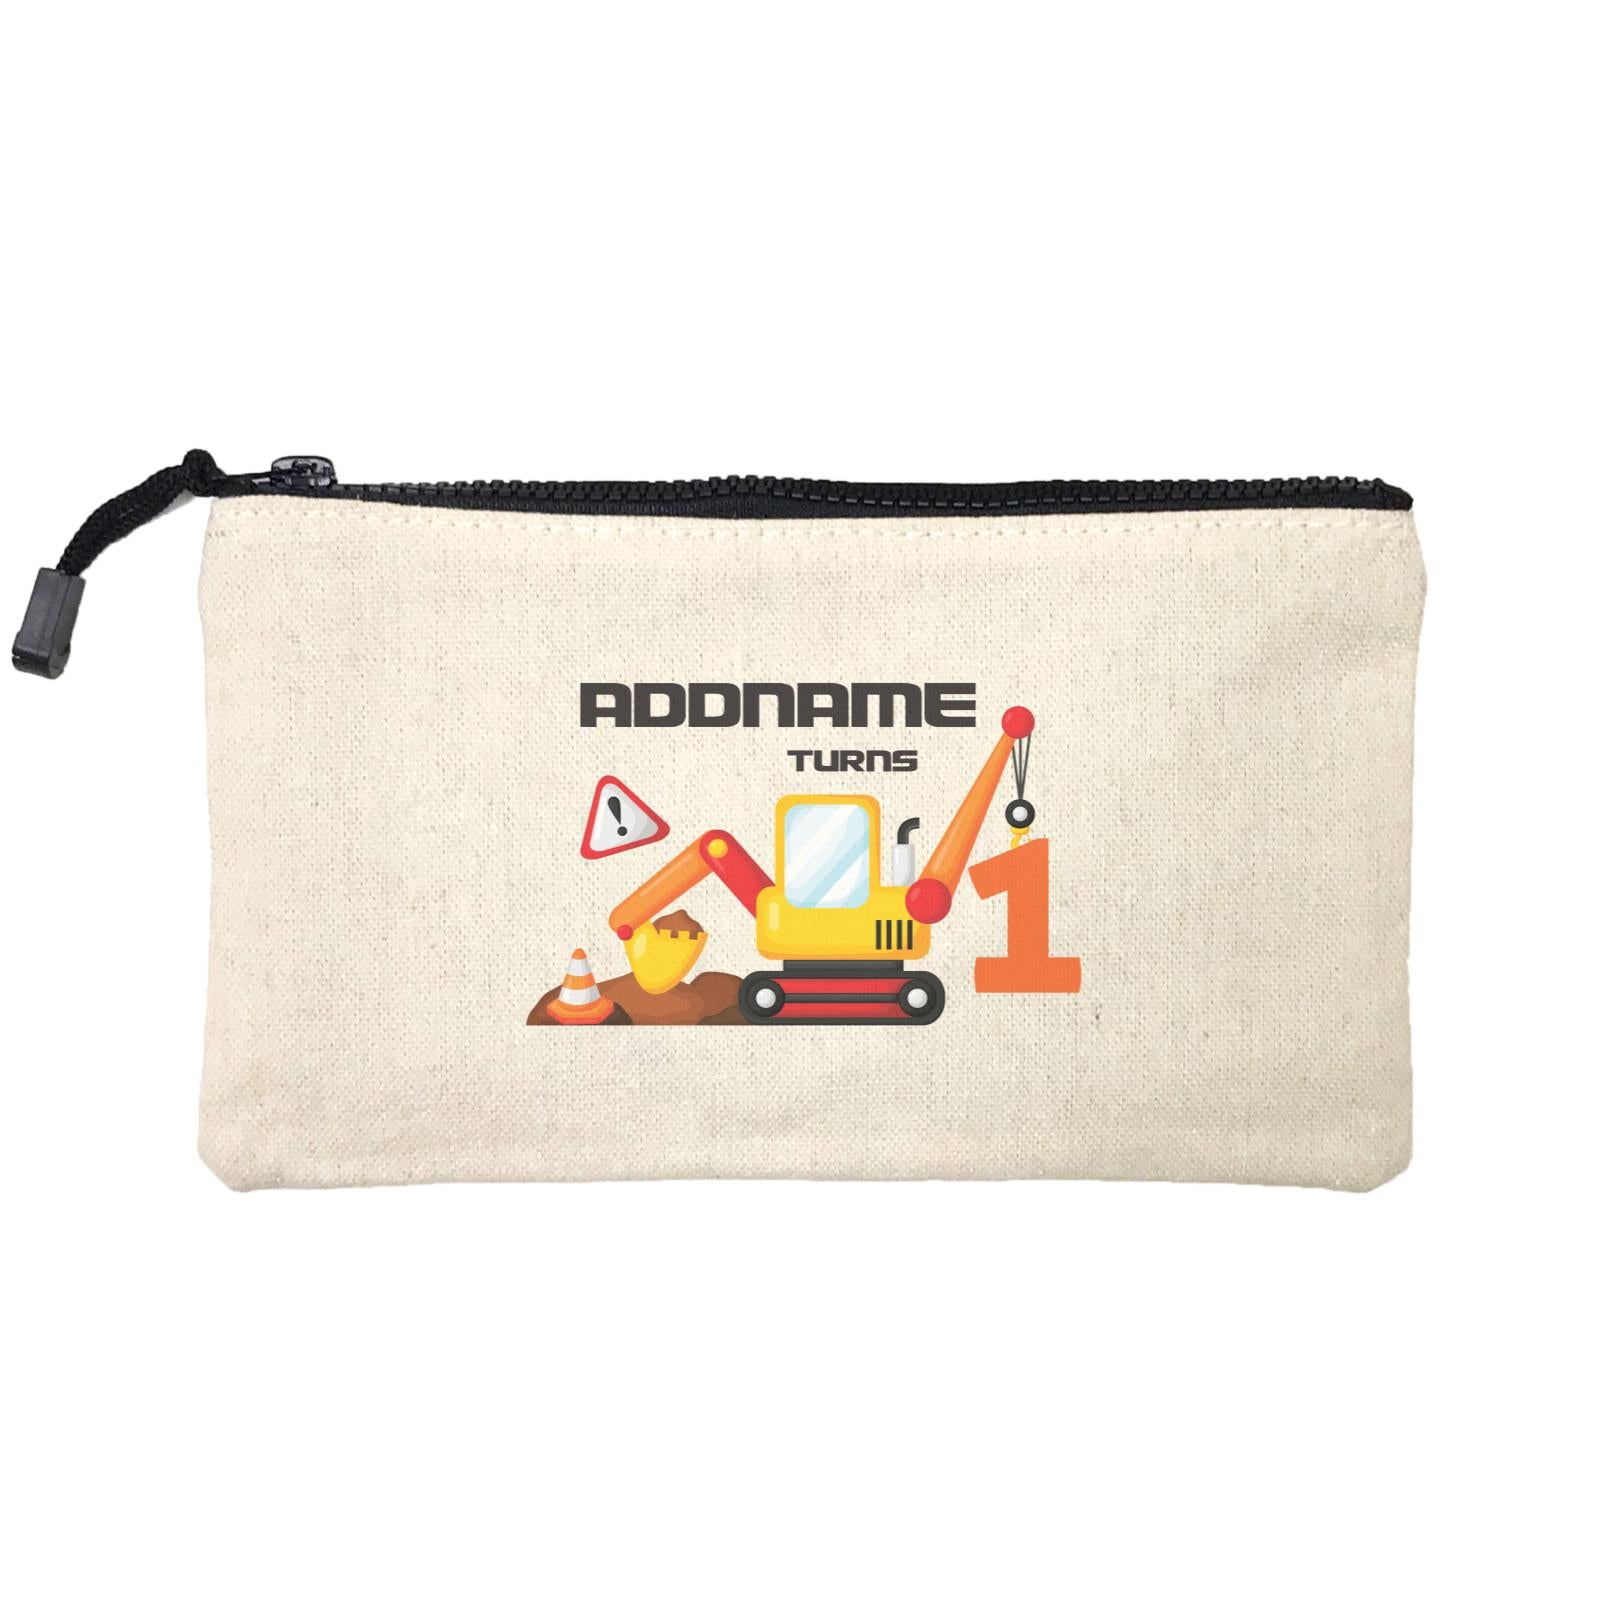 Birthday Construction Excavator Addname Turns 1 Mini Accessories Stationery Pouch